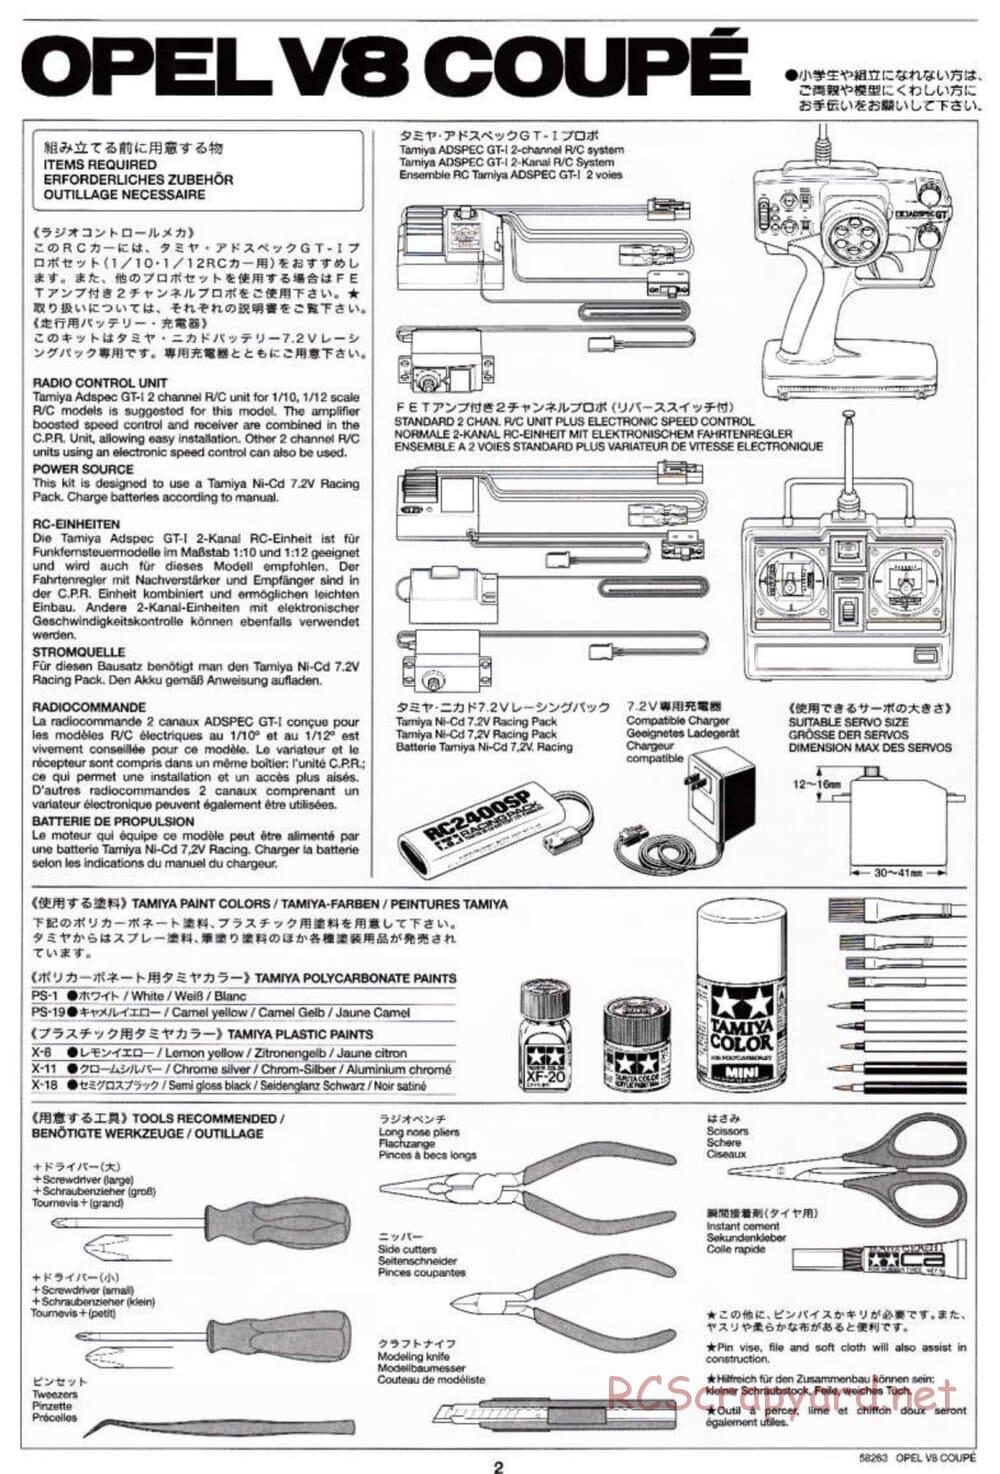 Tamiya - Opel V8 Coupe - TL-01 Chassis - Manual - Page 2